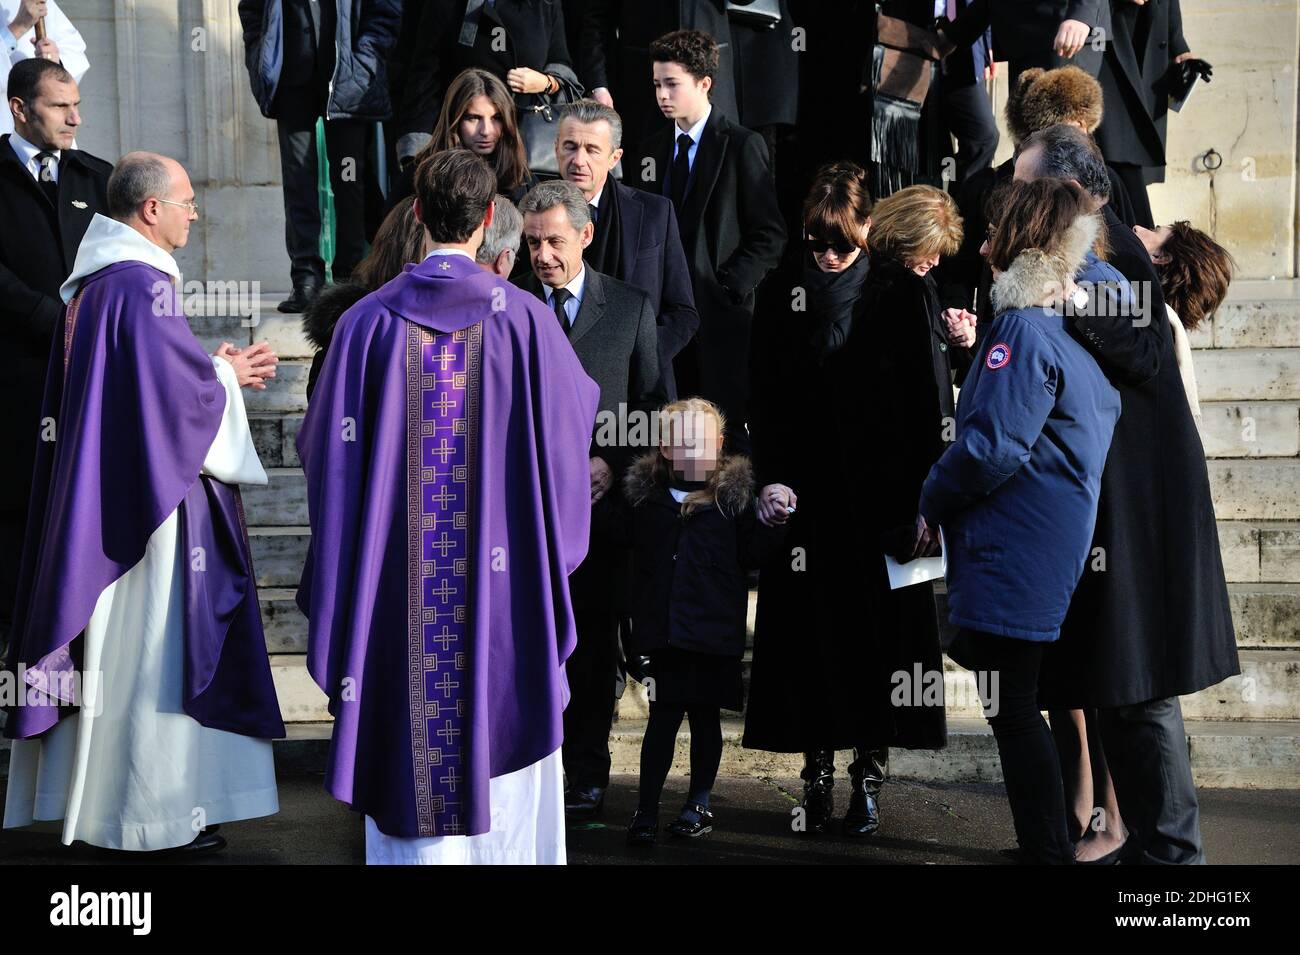 Francois Sarkozy, Nicolas Sarkozy, Carla Bruni-Sarkozy and their daughter during the funeral of Andree Sarkozy aka Dadue, mother of Former French President Nicolas Sarkozy, at Saint-Jean-Baptiste church in Neuilly-Sur-Seine, France on December 18, 2017. Photo by ABACAPRESS.COM Stock Photo